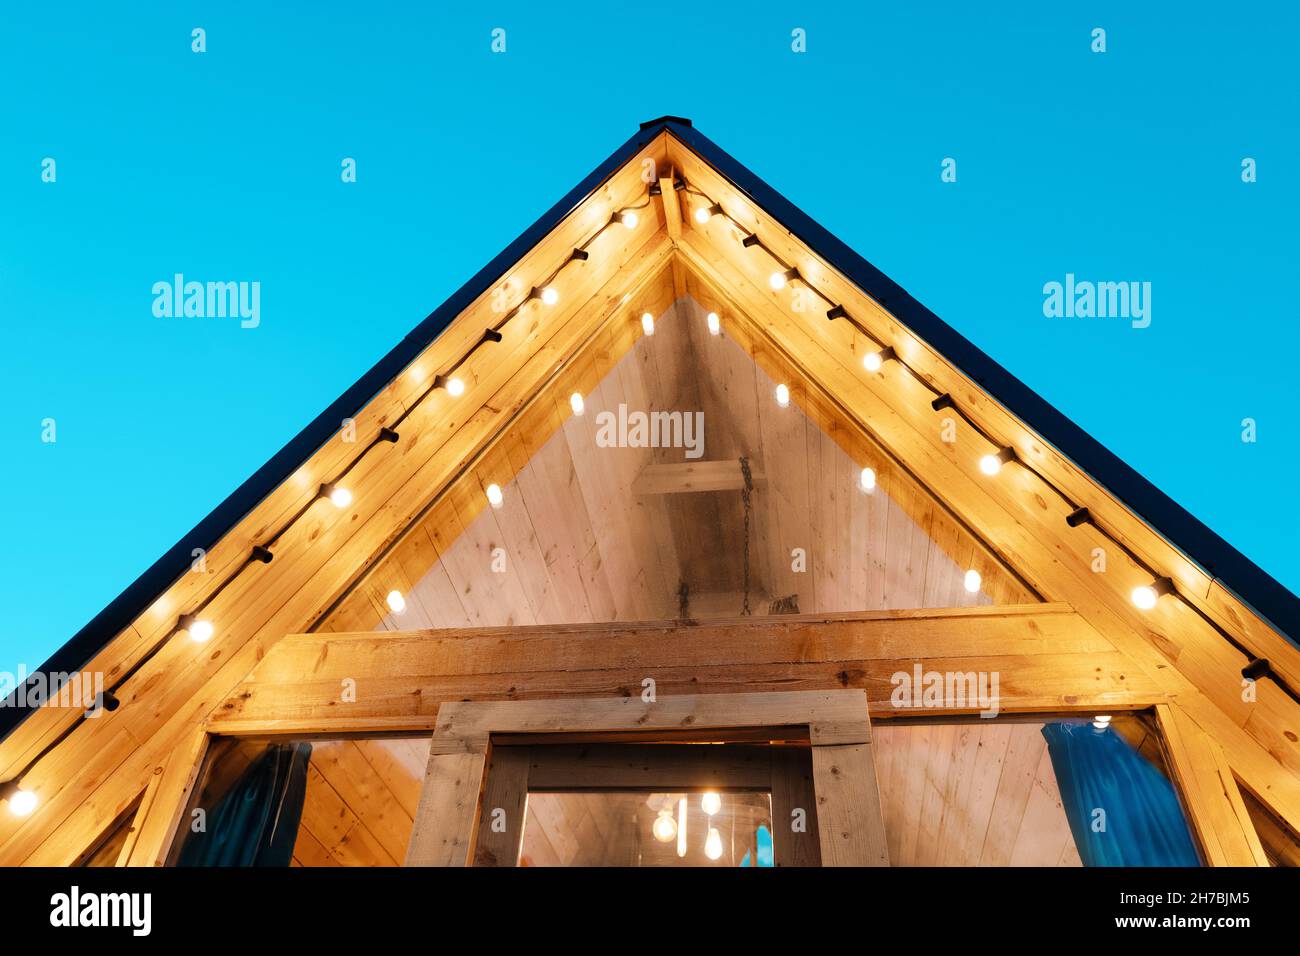 Roof with garlands lights of a small wooden chalet house with glass door and window. The concept of glamping and idyllic holidays Stock Photo